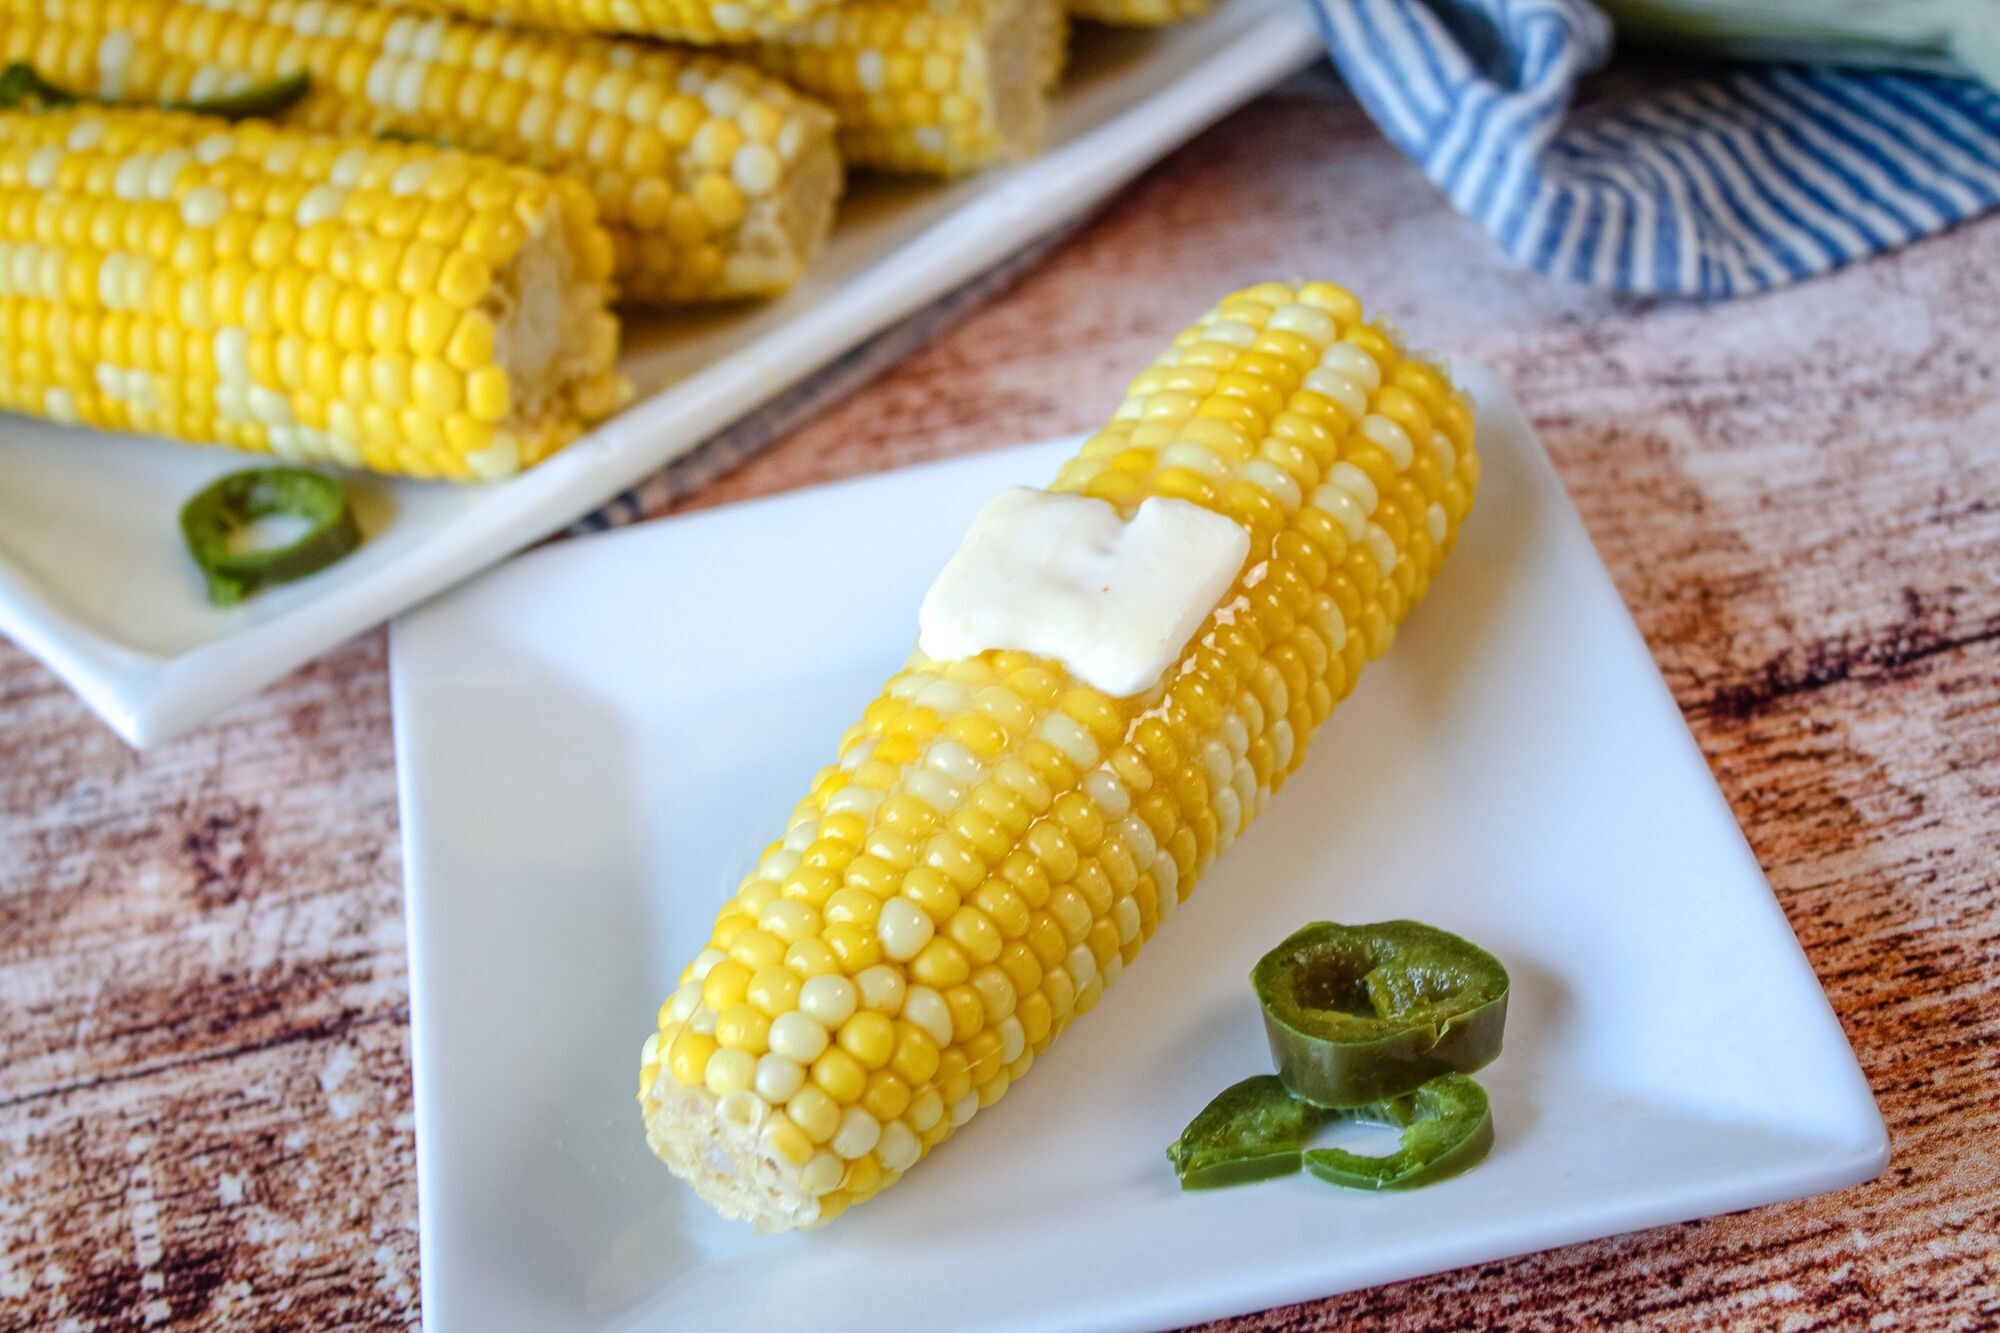 Sweet corn with spices and butter